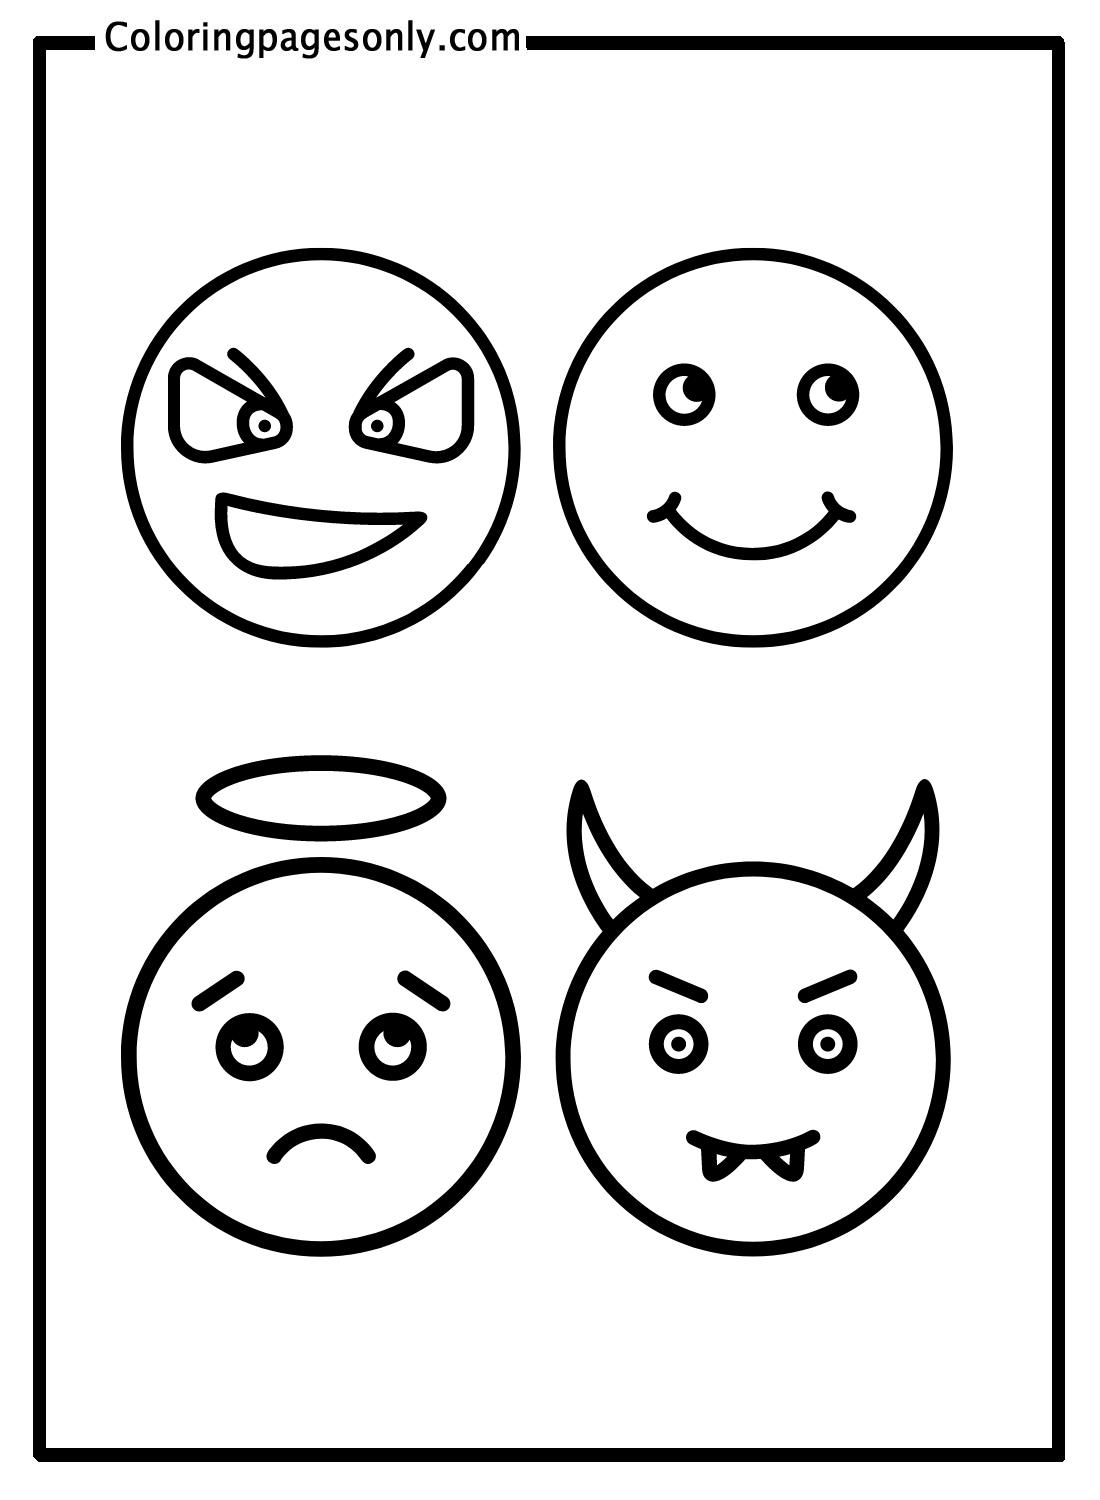 Angel Emotions And Emotions Evil Coloring Pages